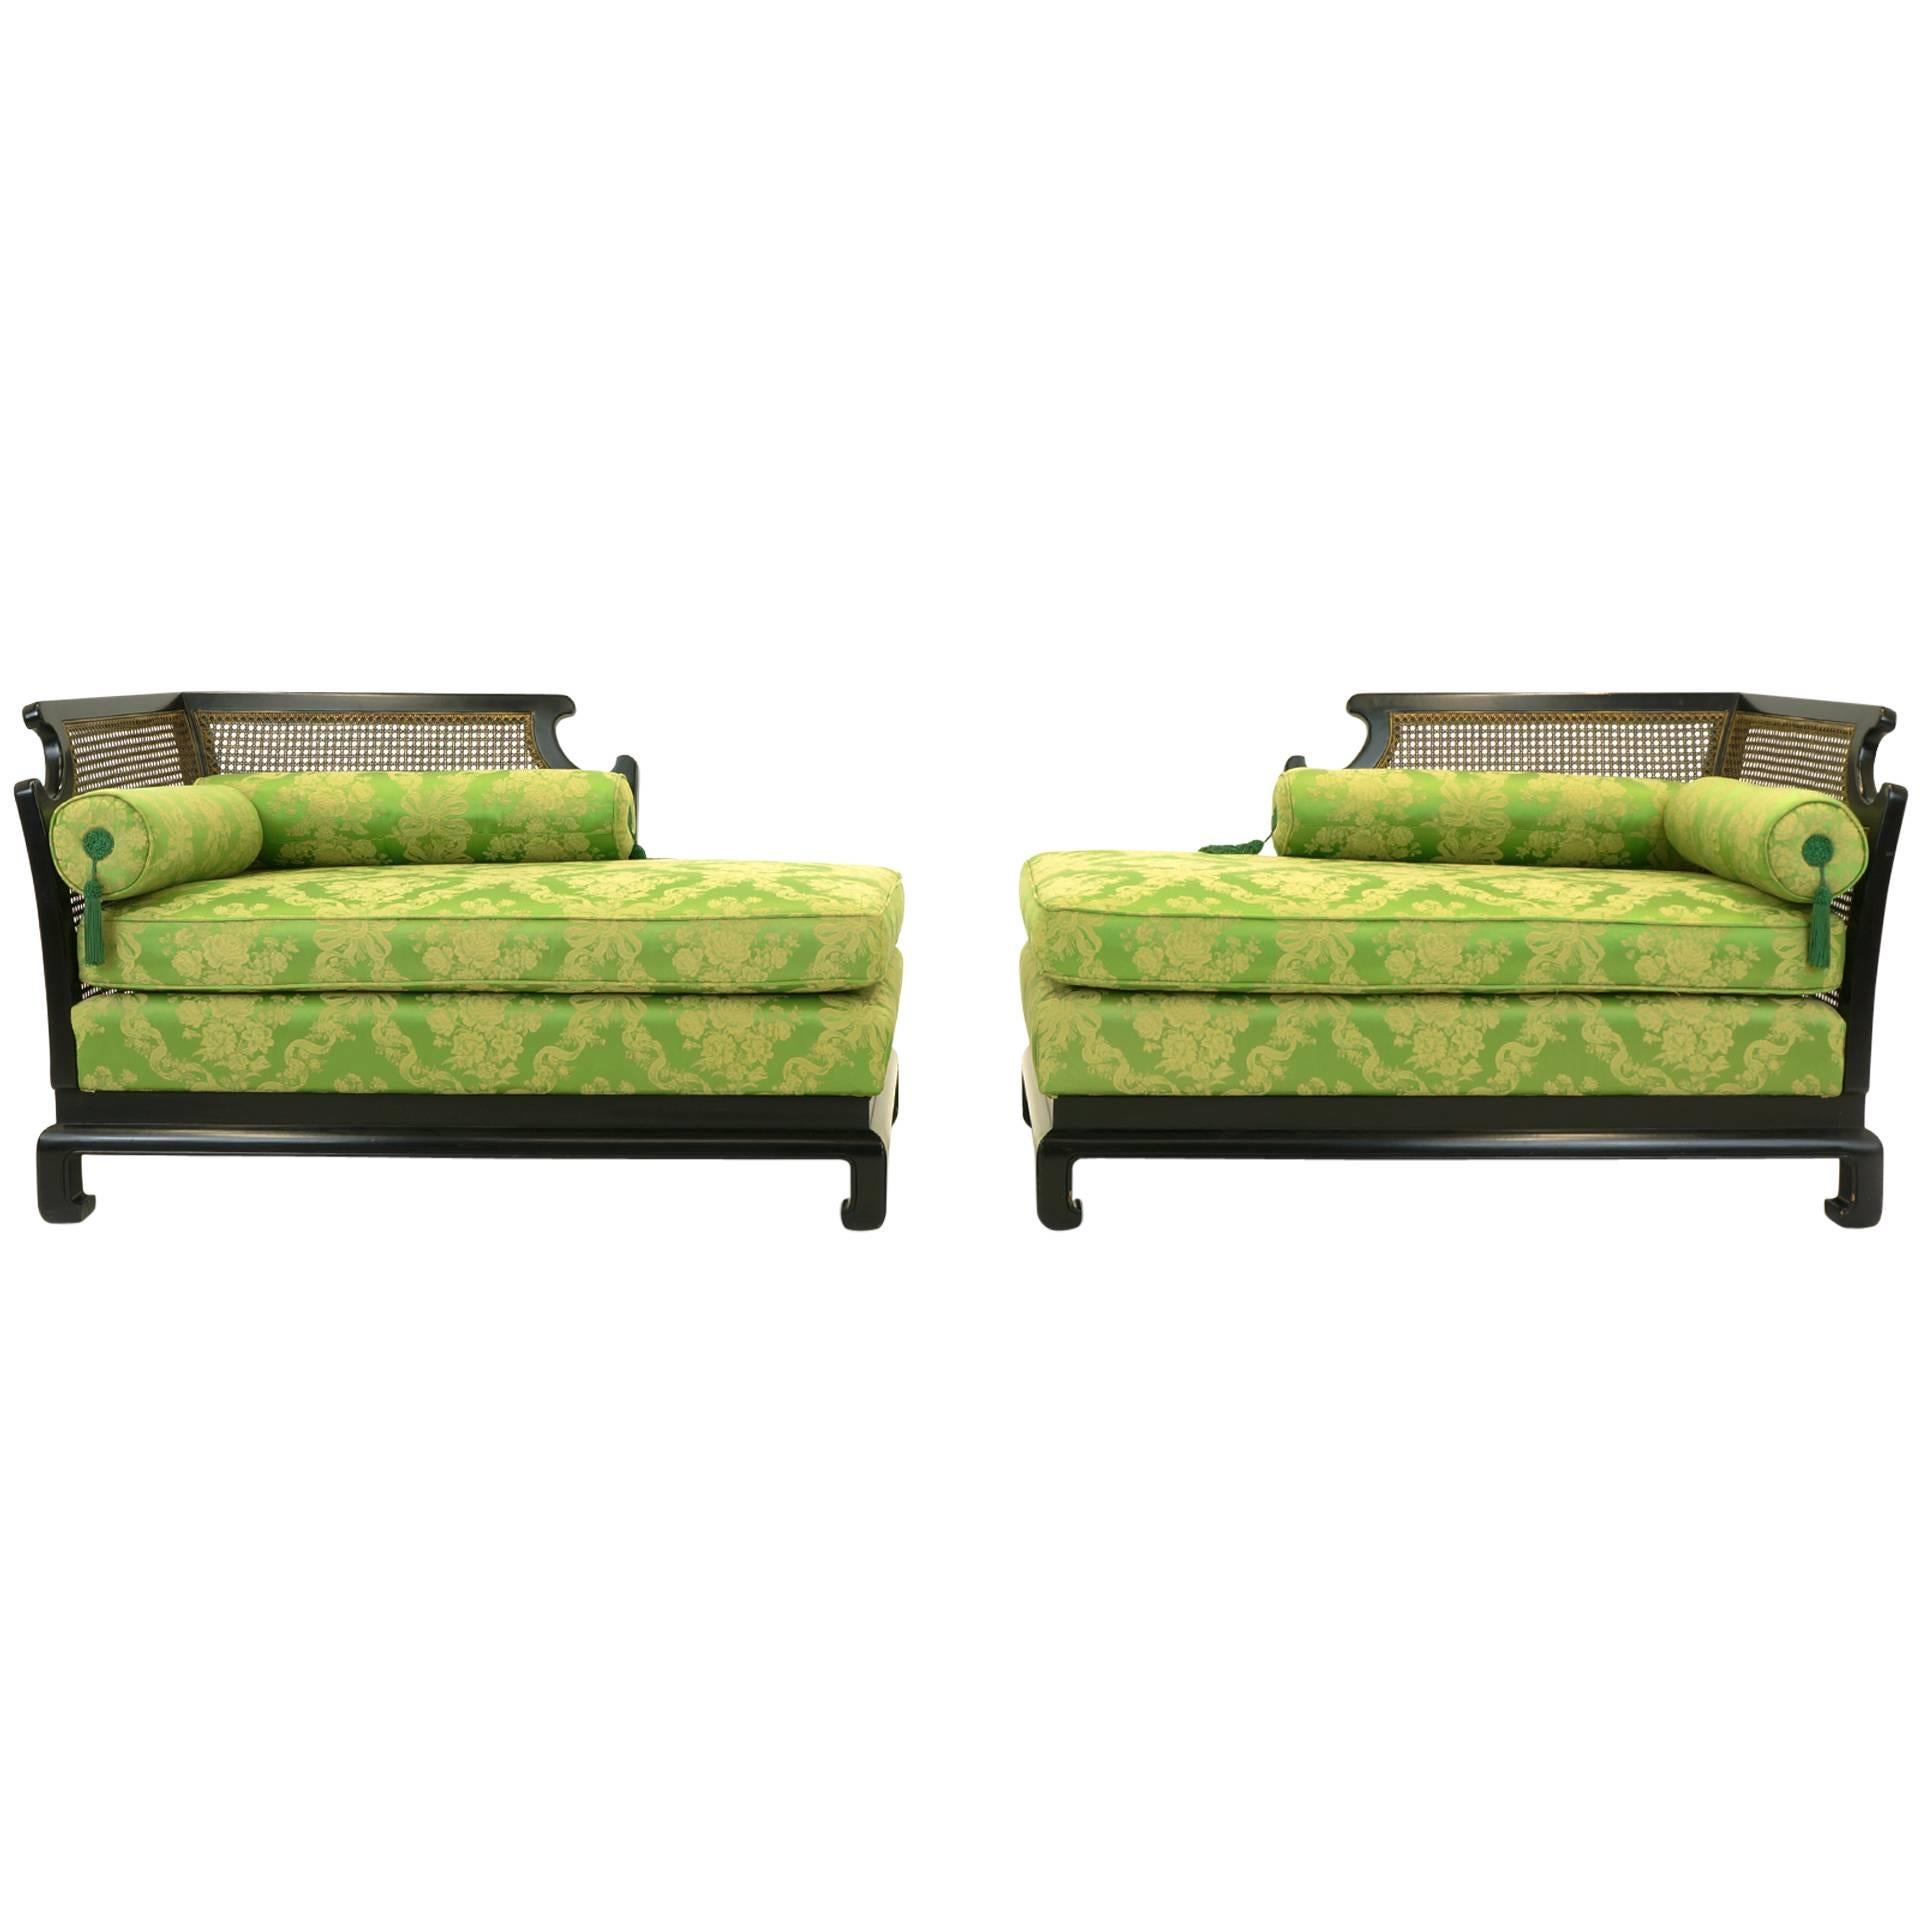 Pair of Asian Settees or Chaise Longues